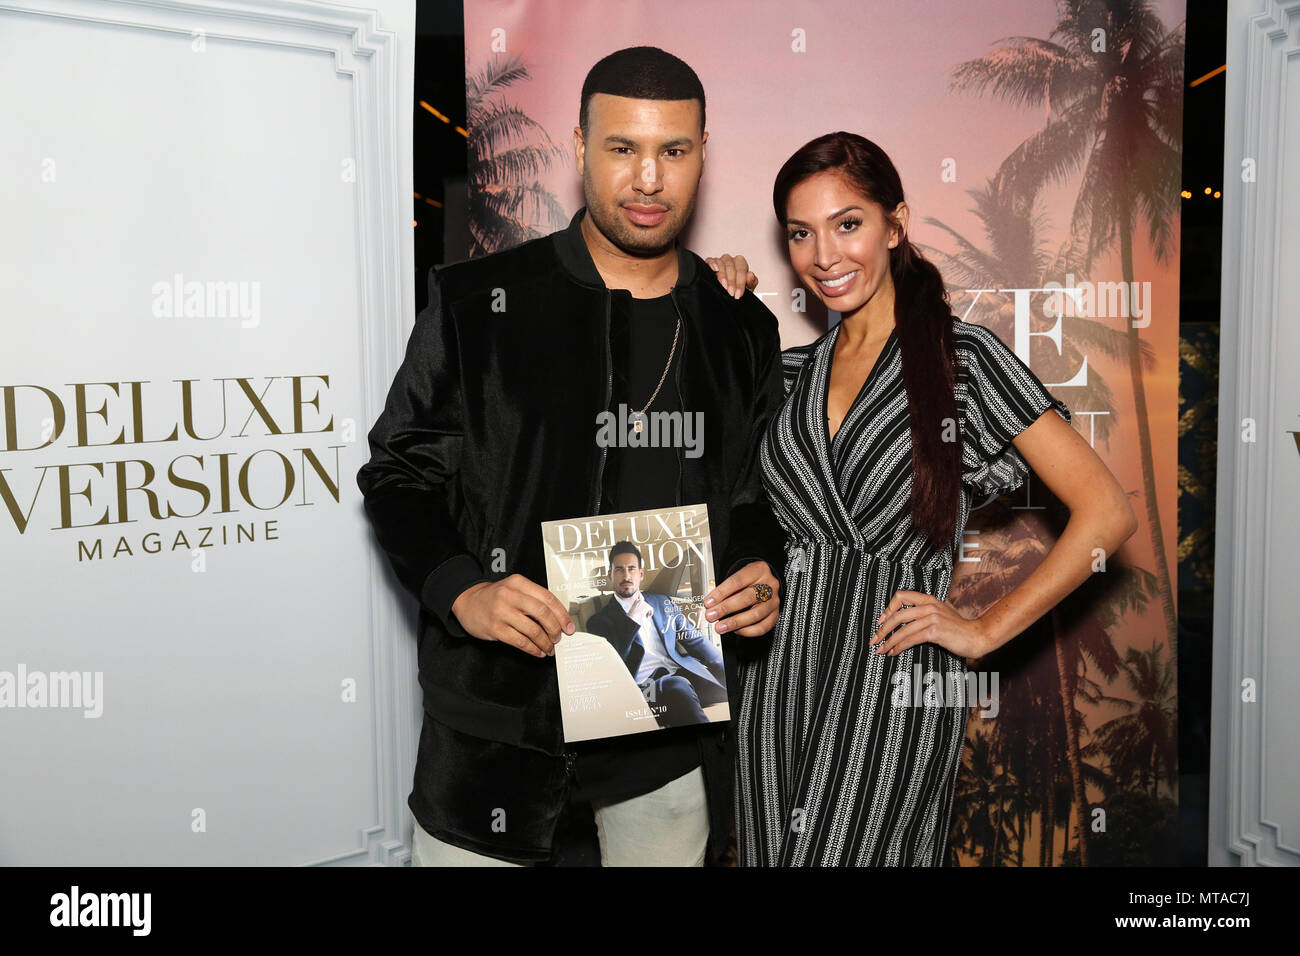 pint koste Har det dårligt Celebrities attend "Deluxe Version" Magazine Launch event at Hyde Sunset.  Featuring: Tim Hancock, Farah Abraham Where: Los Angeles, California,  United States When: 26 Apr 2018 Credit: Brian To/WENN.com Stock Photo -  Alamy